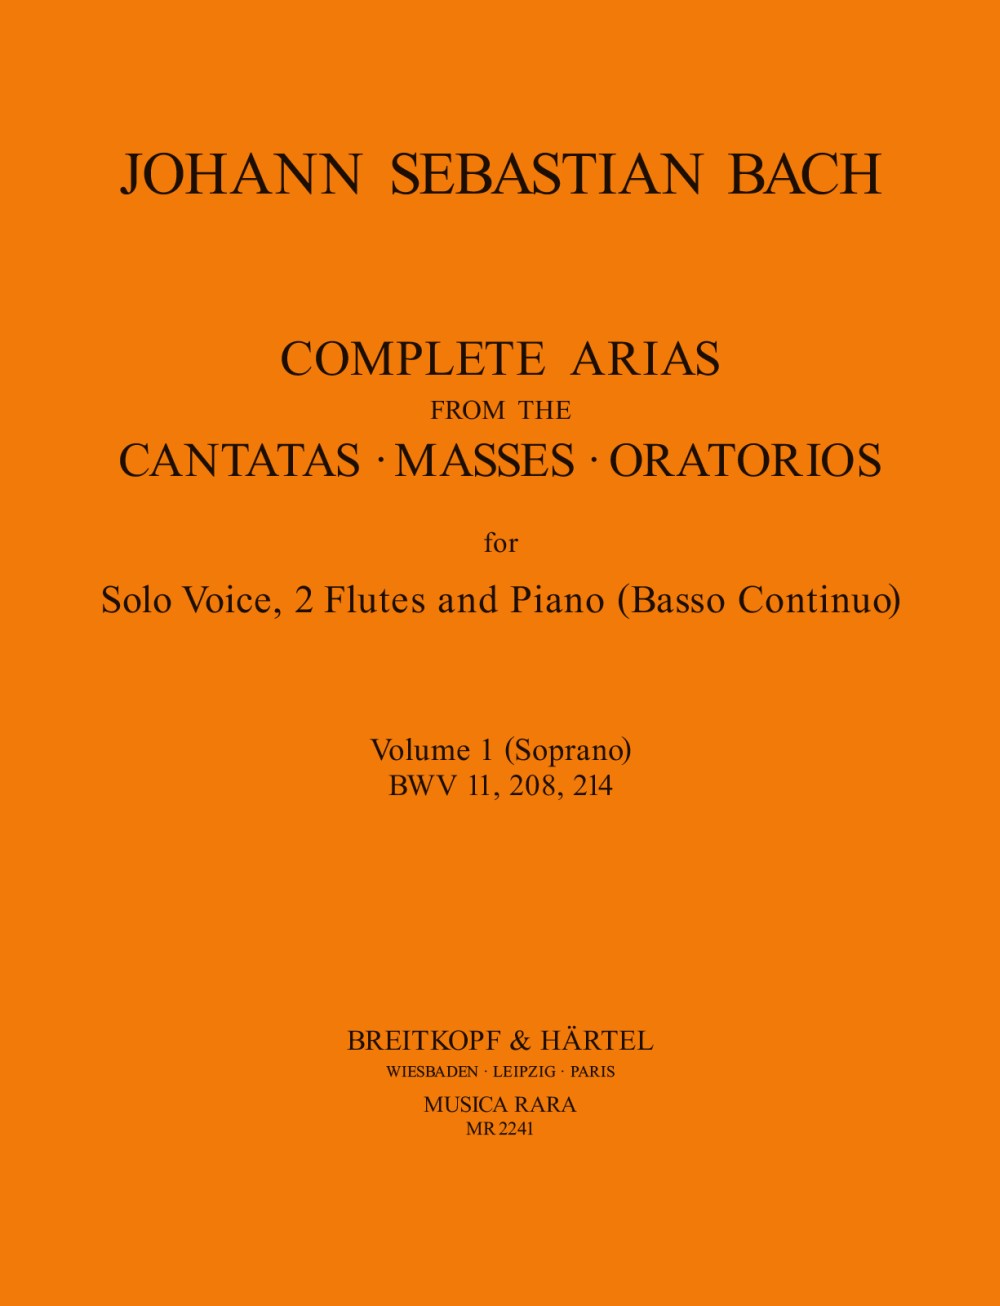 Bach Complete Arias from the Cantatas, Masses and Oratorios Volume 1